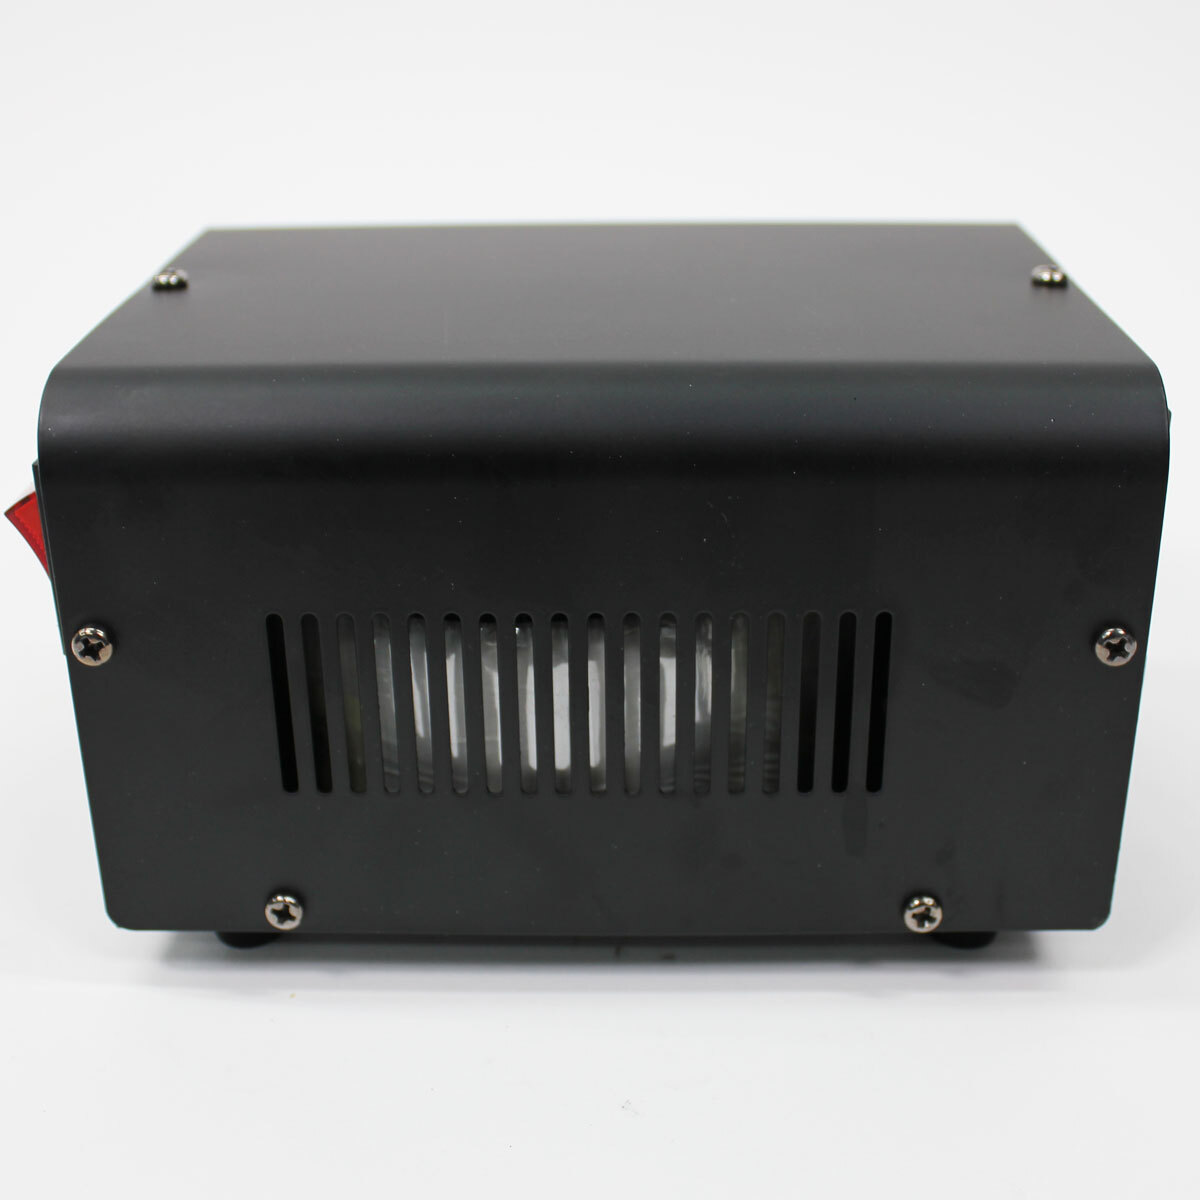 ryoken up trance step down transformer 800W abroad domestic both for type transformer portable trance abroad equipment correspondence present condition goods secondhand goods nn0101 161